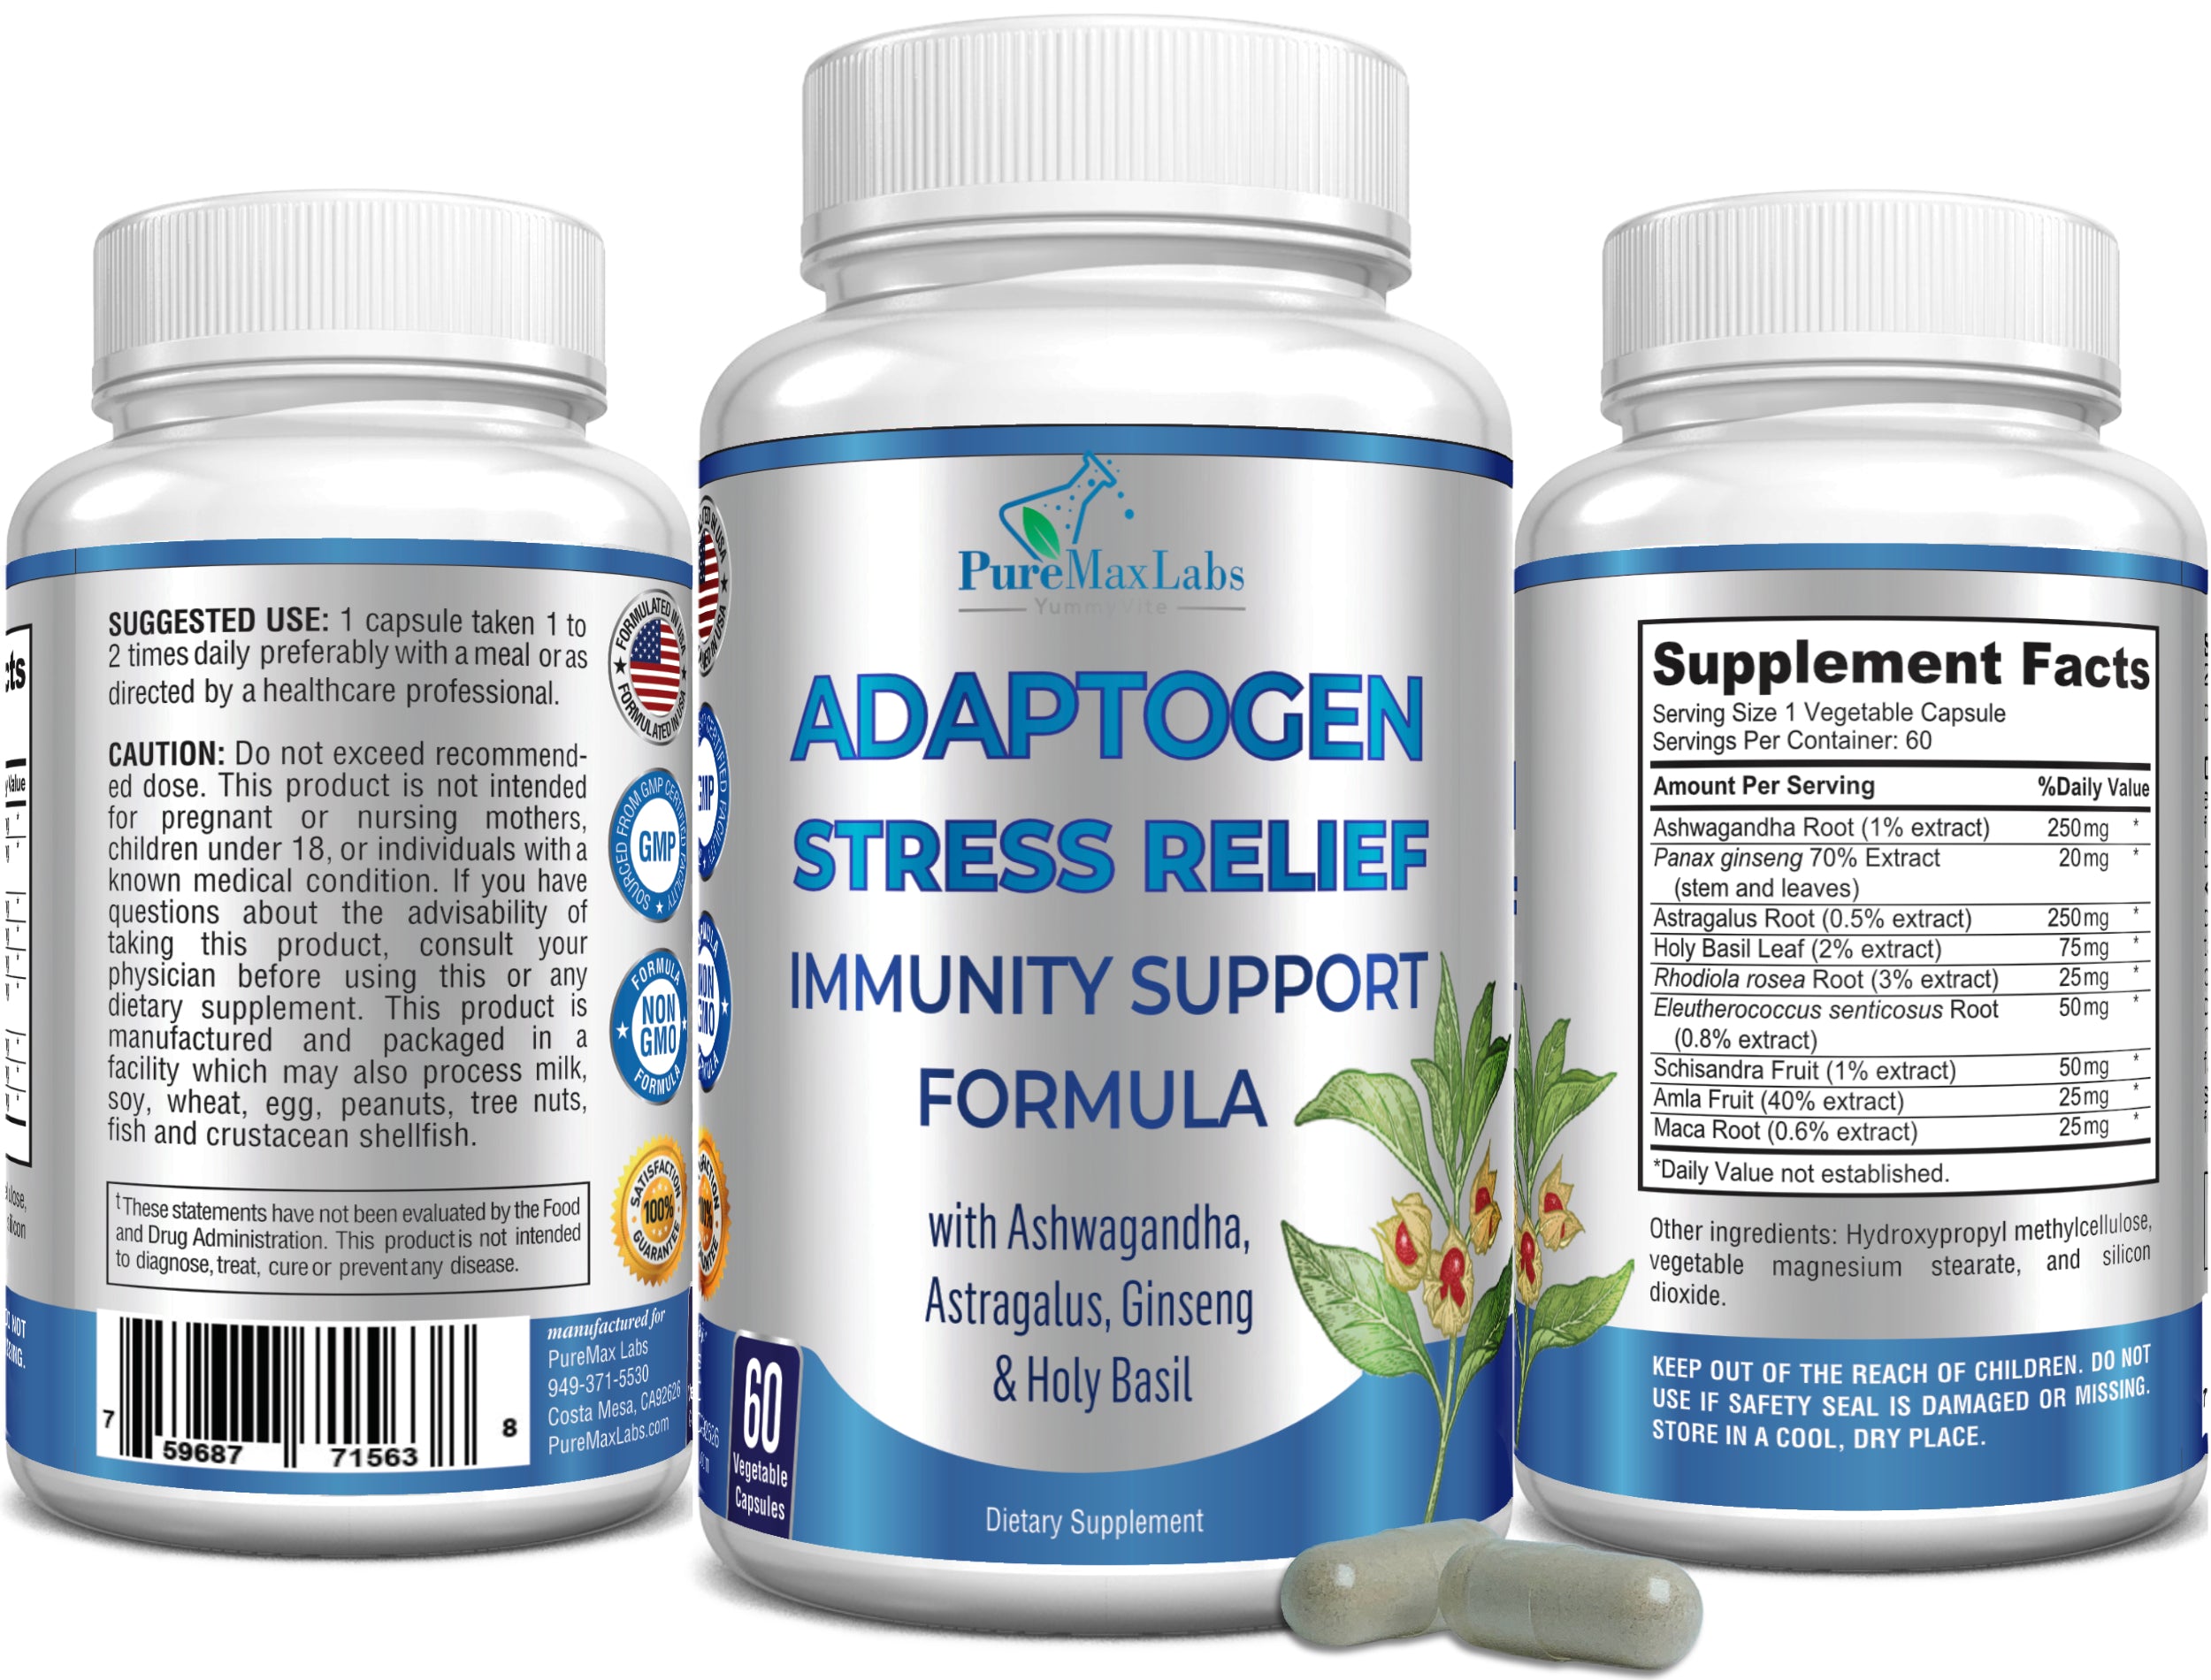 Adaptogen stress relief products